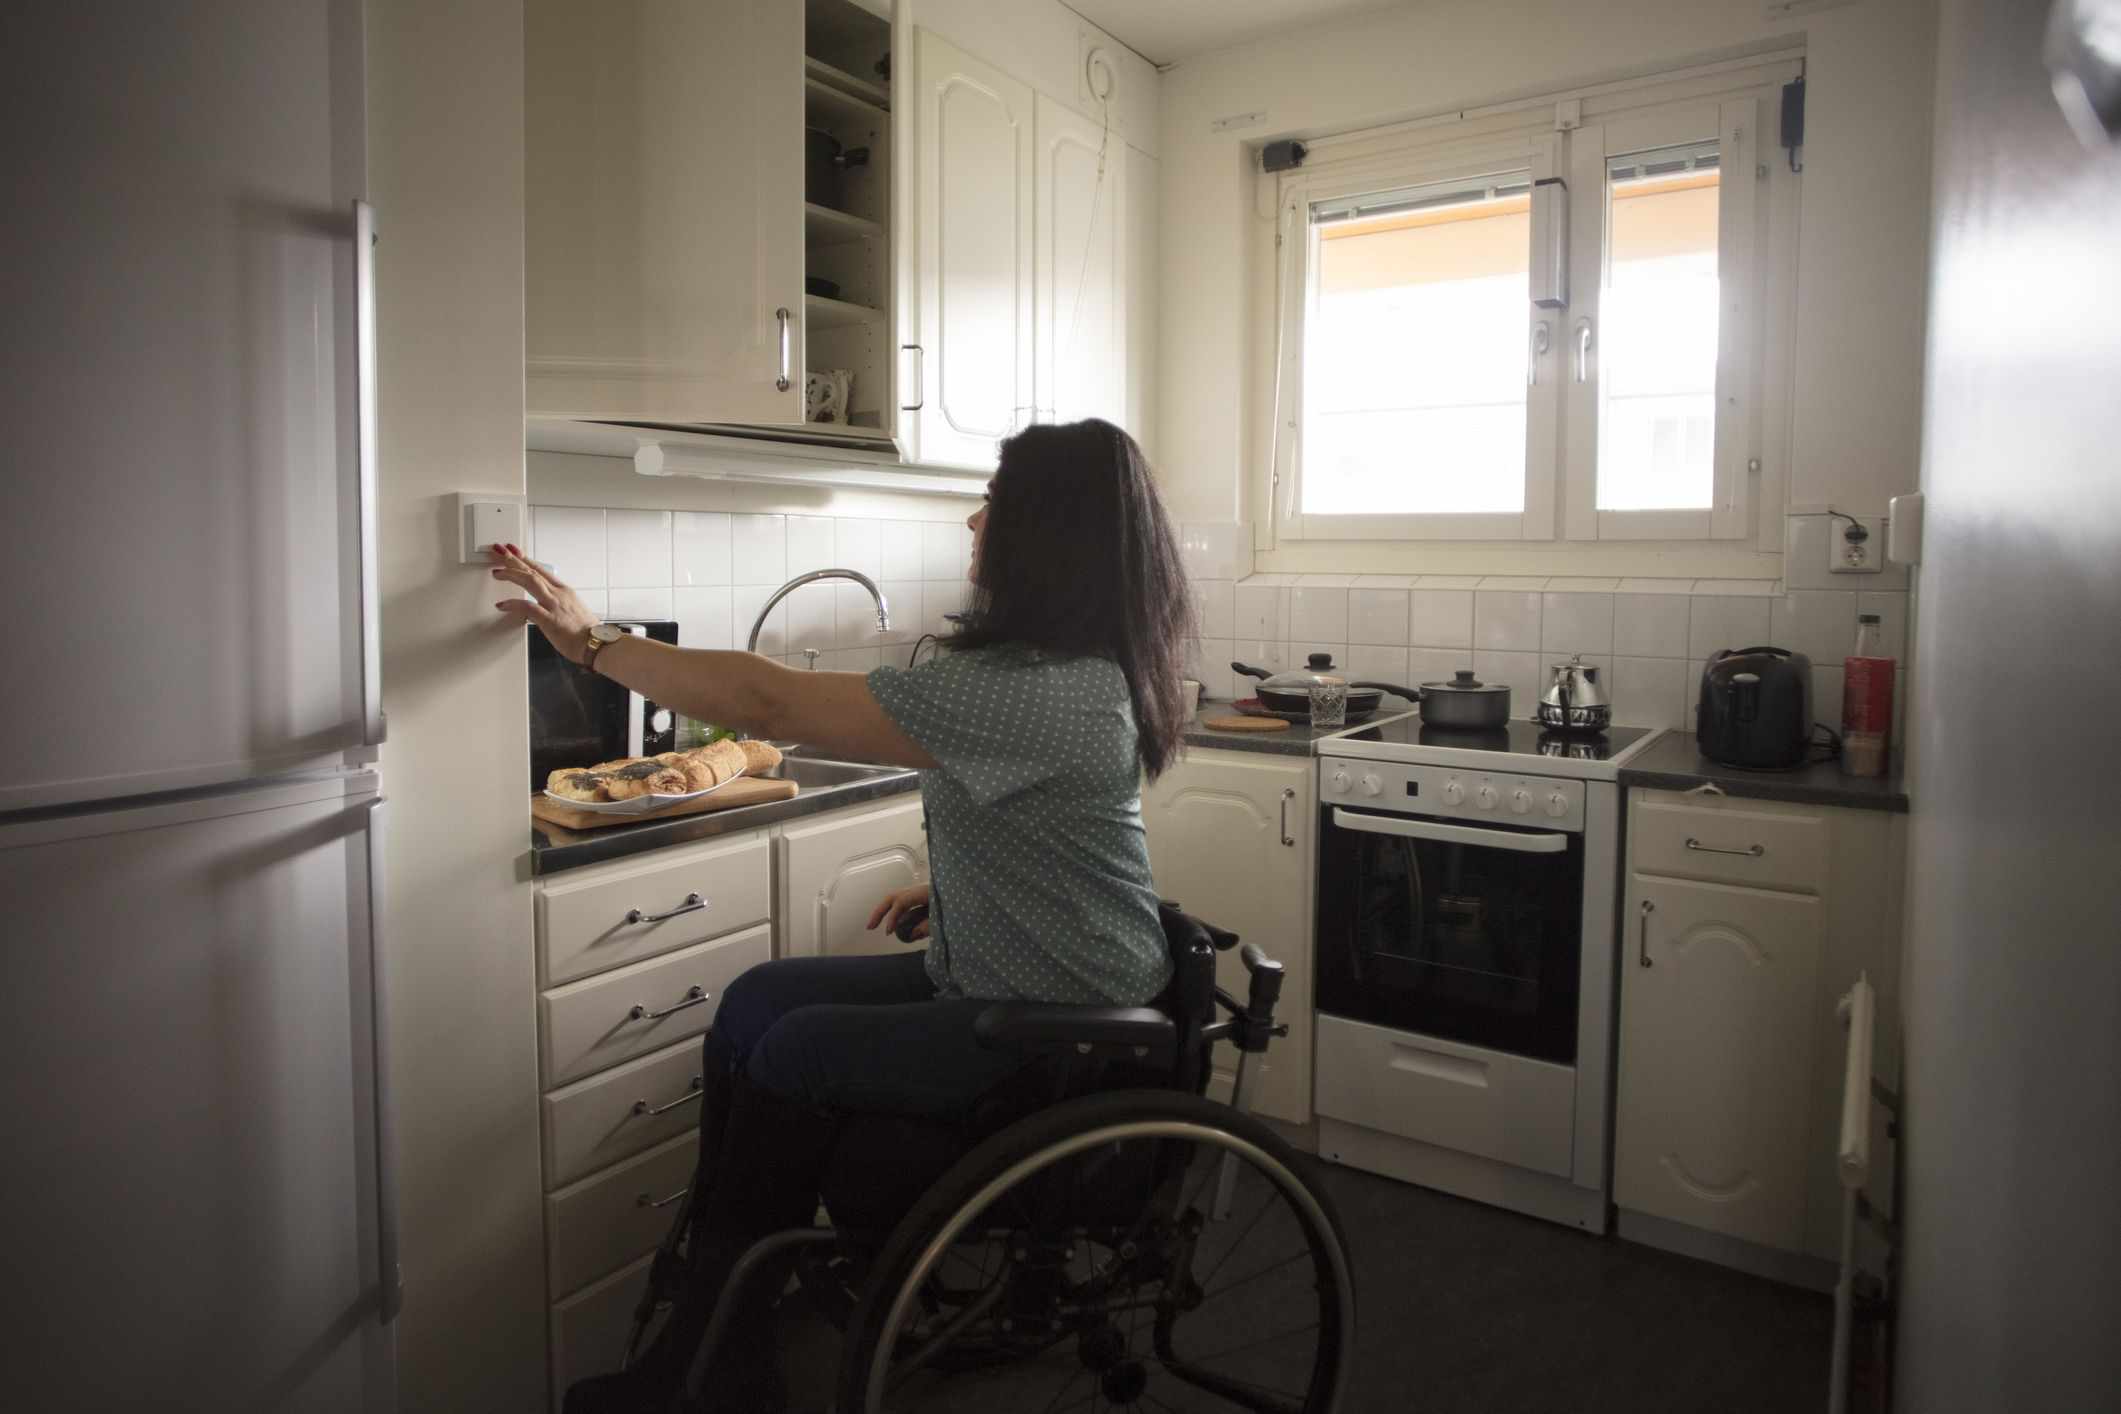 Woman in a Wheelchair Pushing a Button on the Wall in Her Kitchen